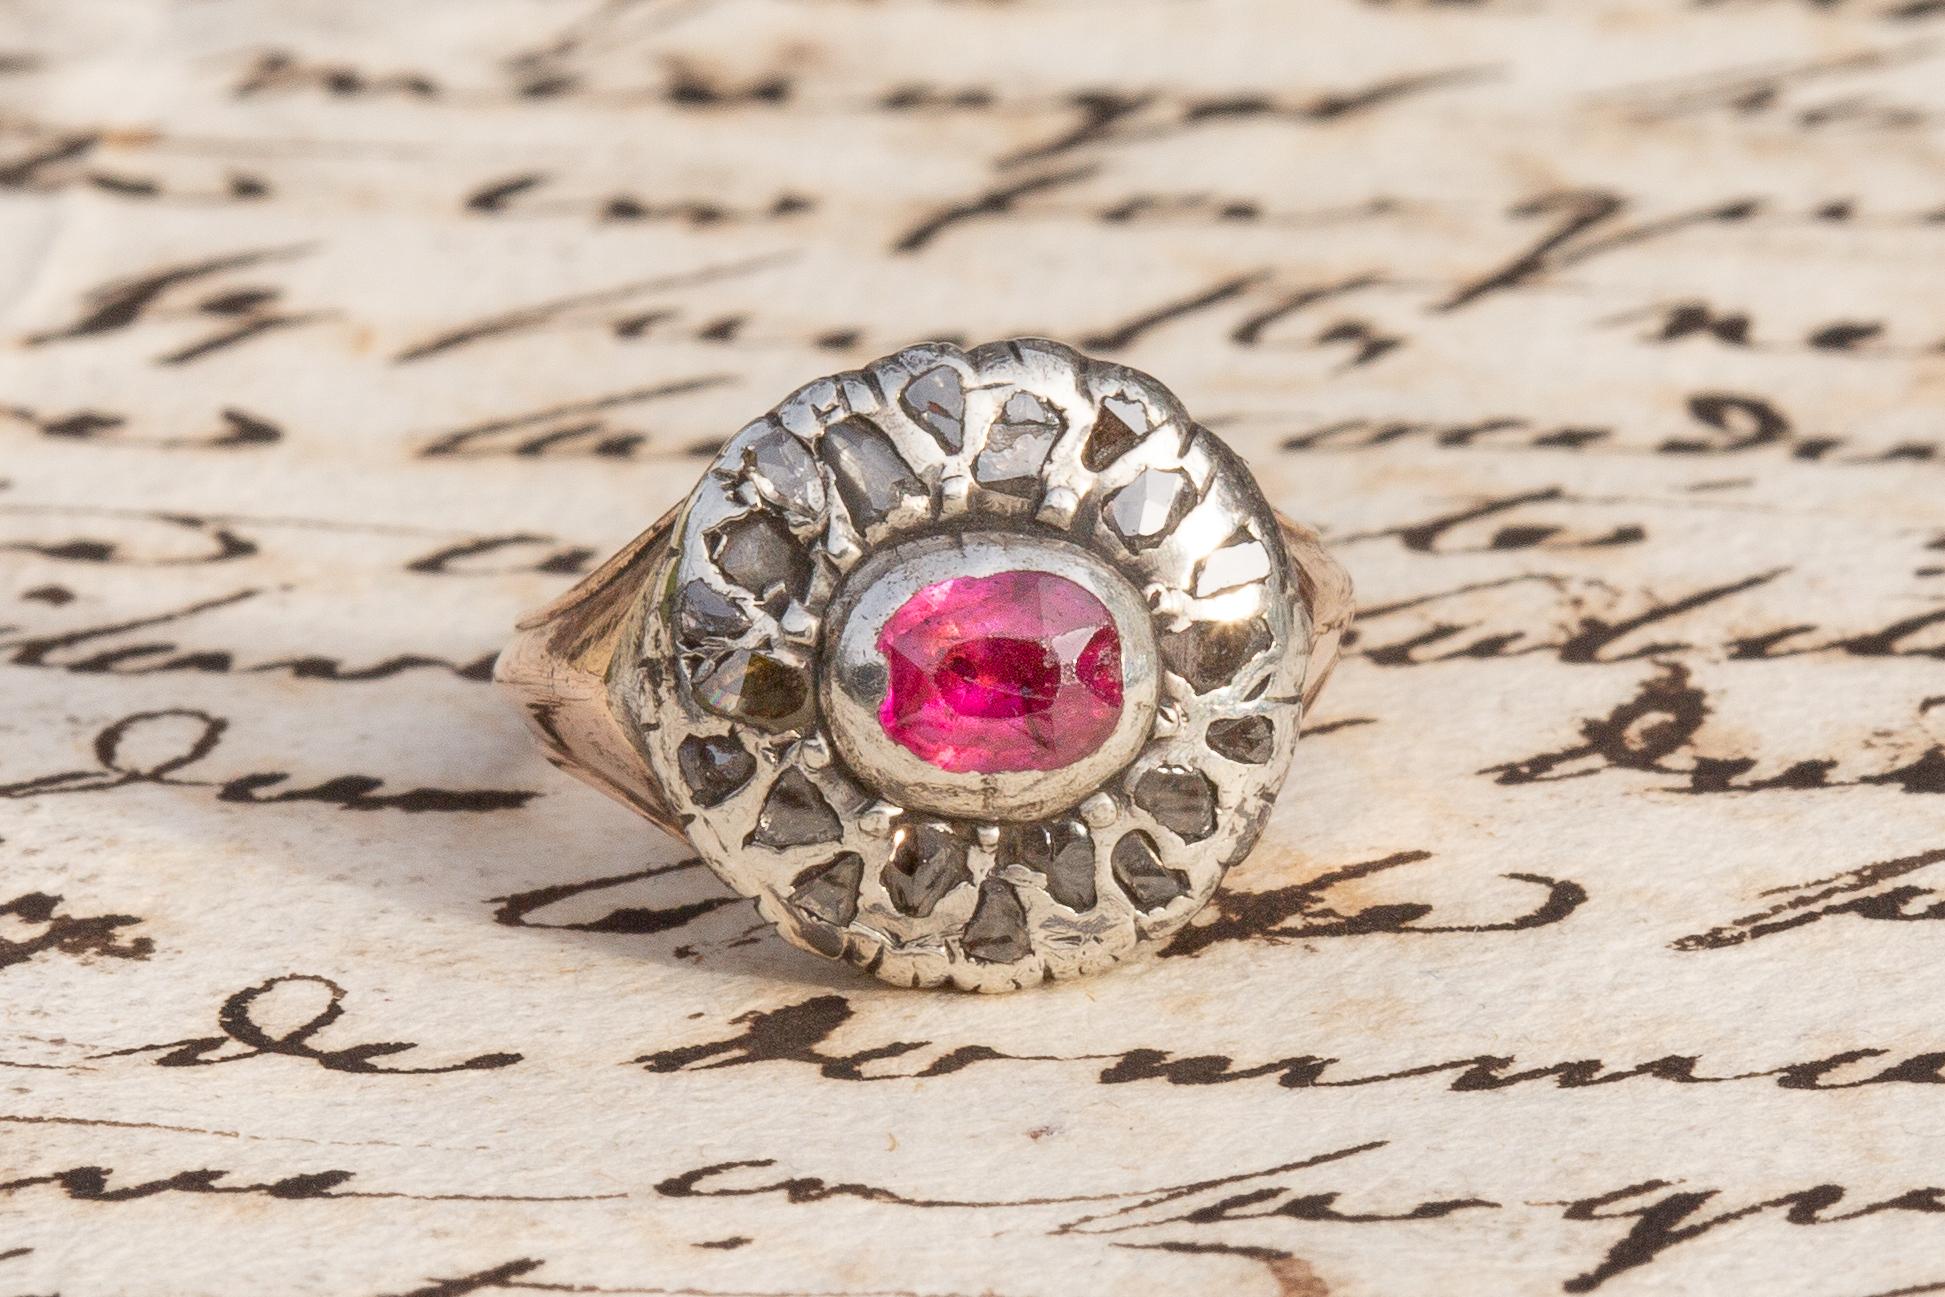 This unusual antique Georgian era floral ruby and diamond cluster ring dating to around 1800 was probably made in Italy. In the middle of the ring head lies a collet set and foil-backed bright pink ruby. It is surrounded by a sea of 20 flat-cut and